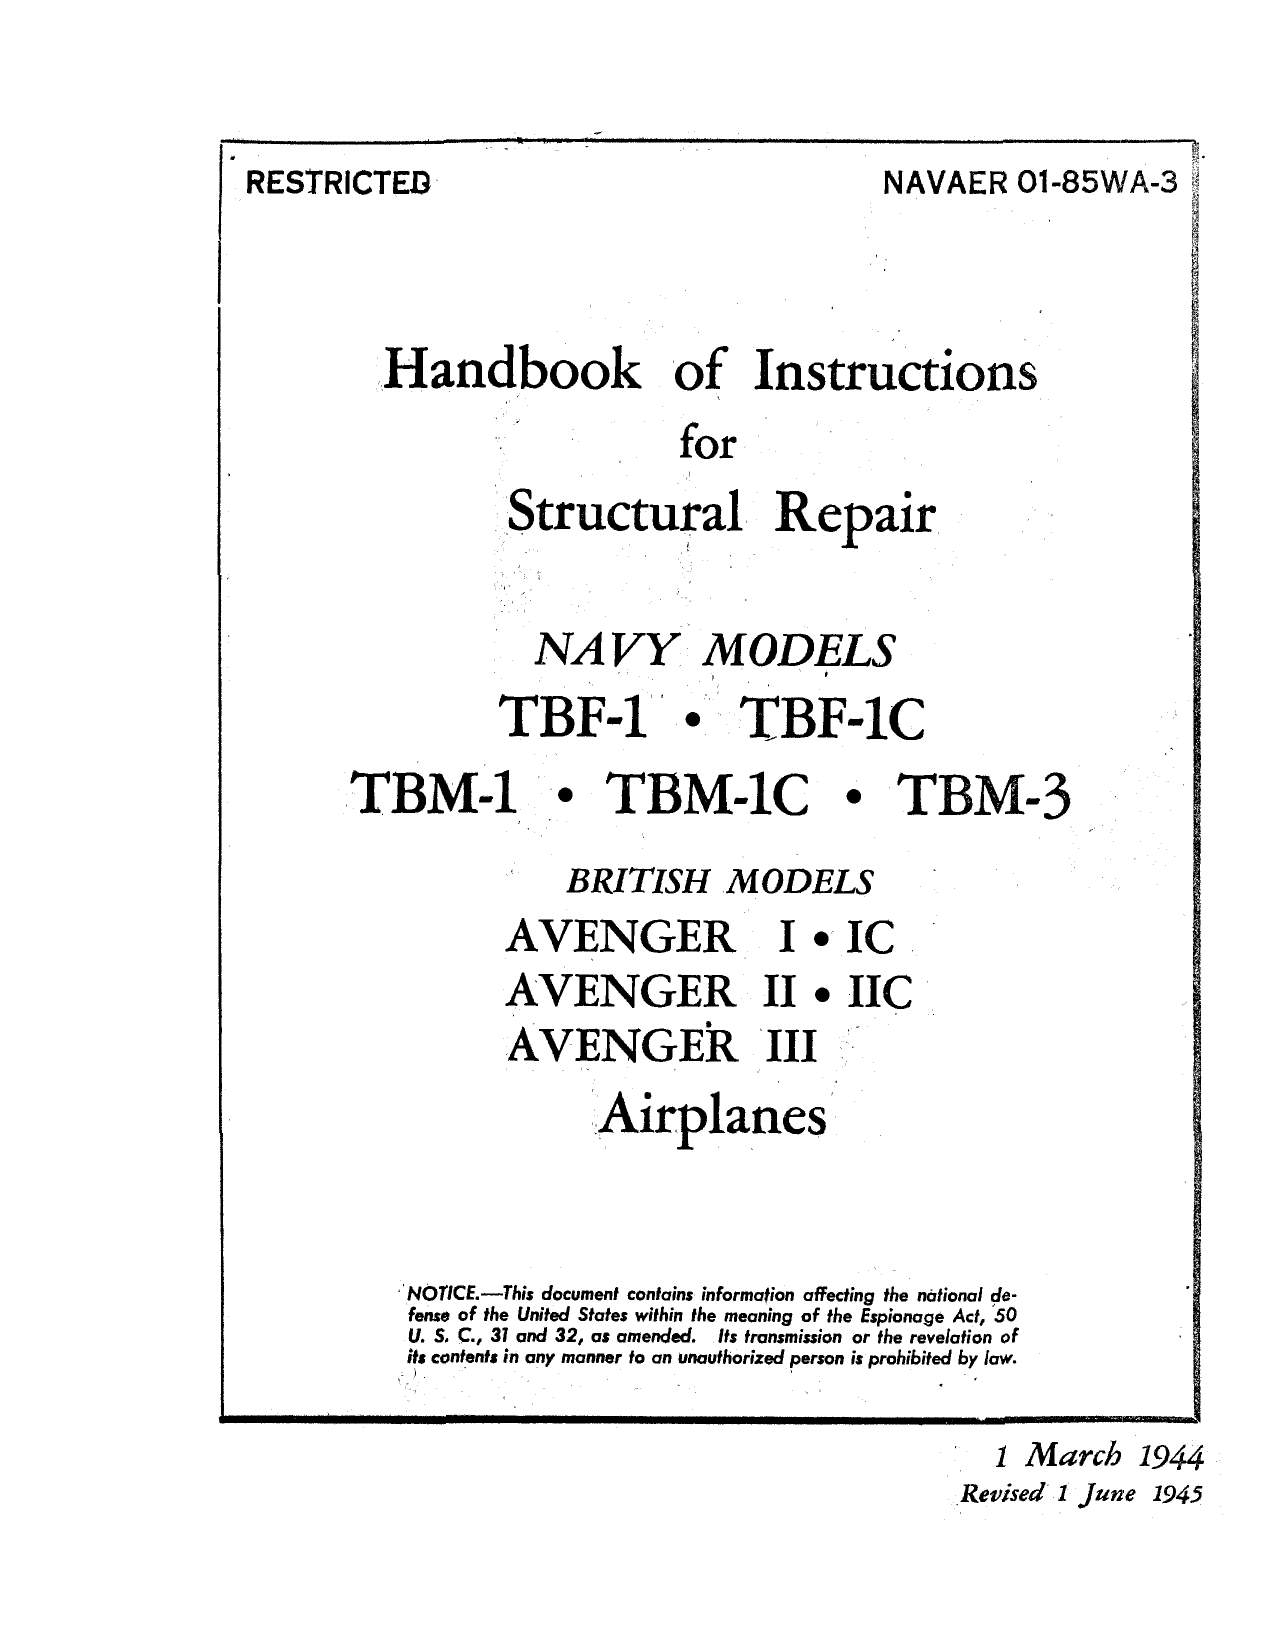 Sample page 1 from AirCorps Library document: Handbook of Instructions for Structural Repair for TBF, & TBM Aircraft